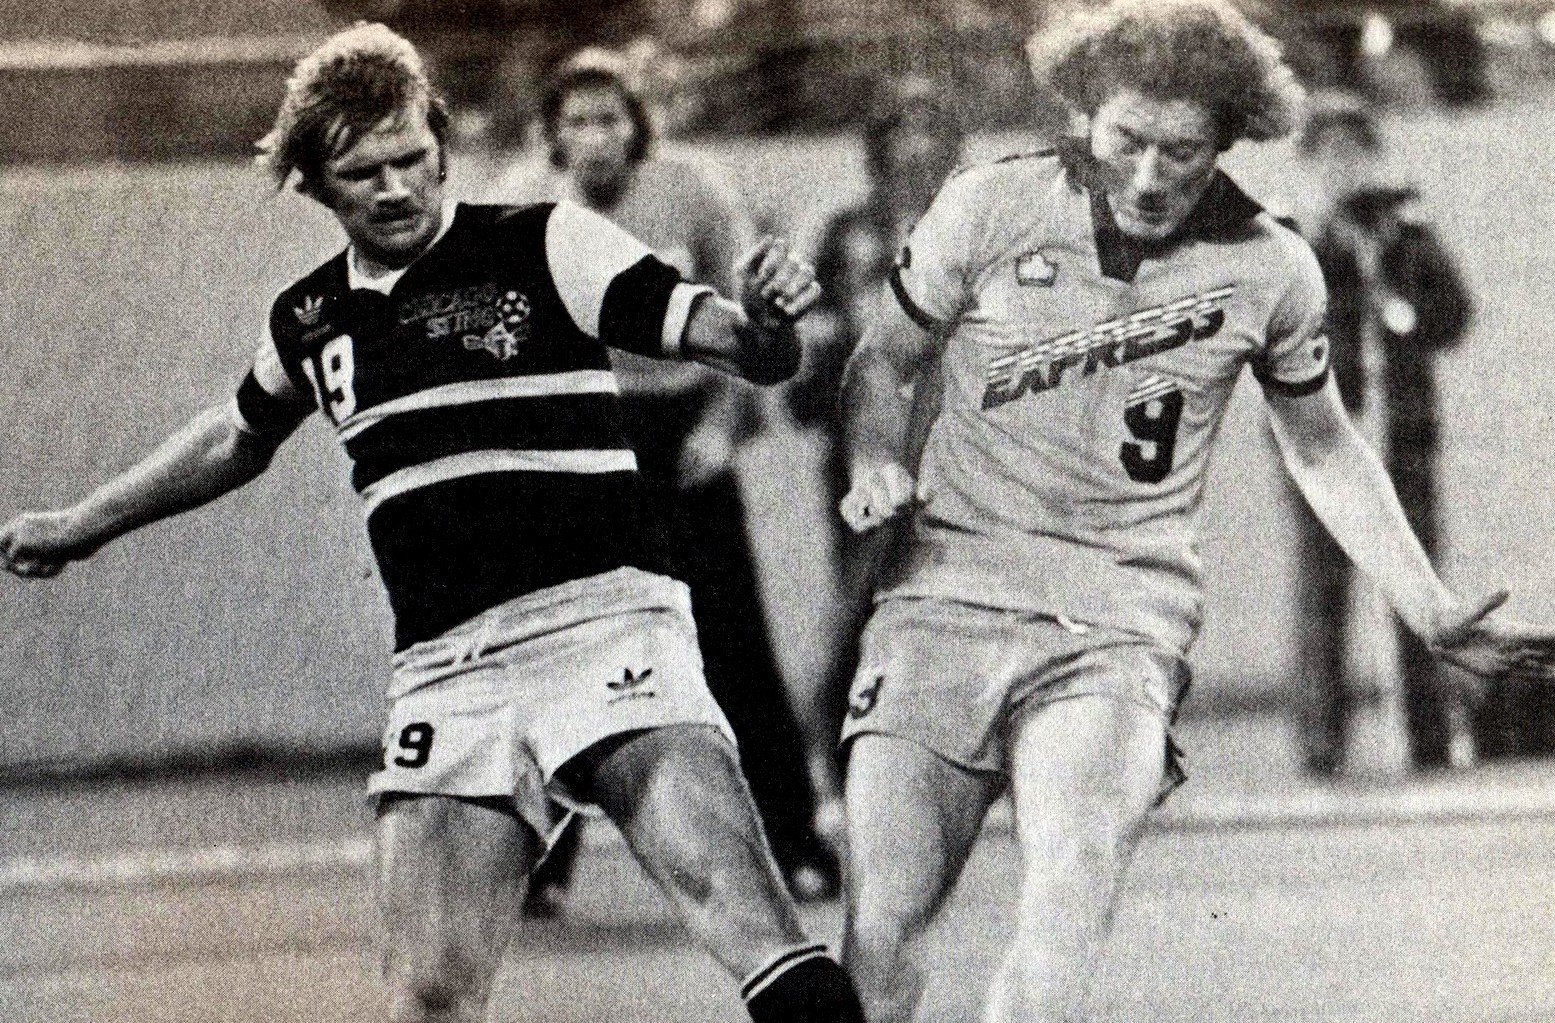 A young Alan Brazil in action for Detroit Express on the plastic in the late 1970s.